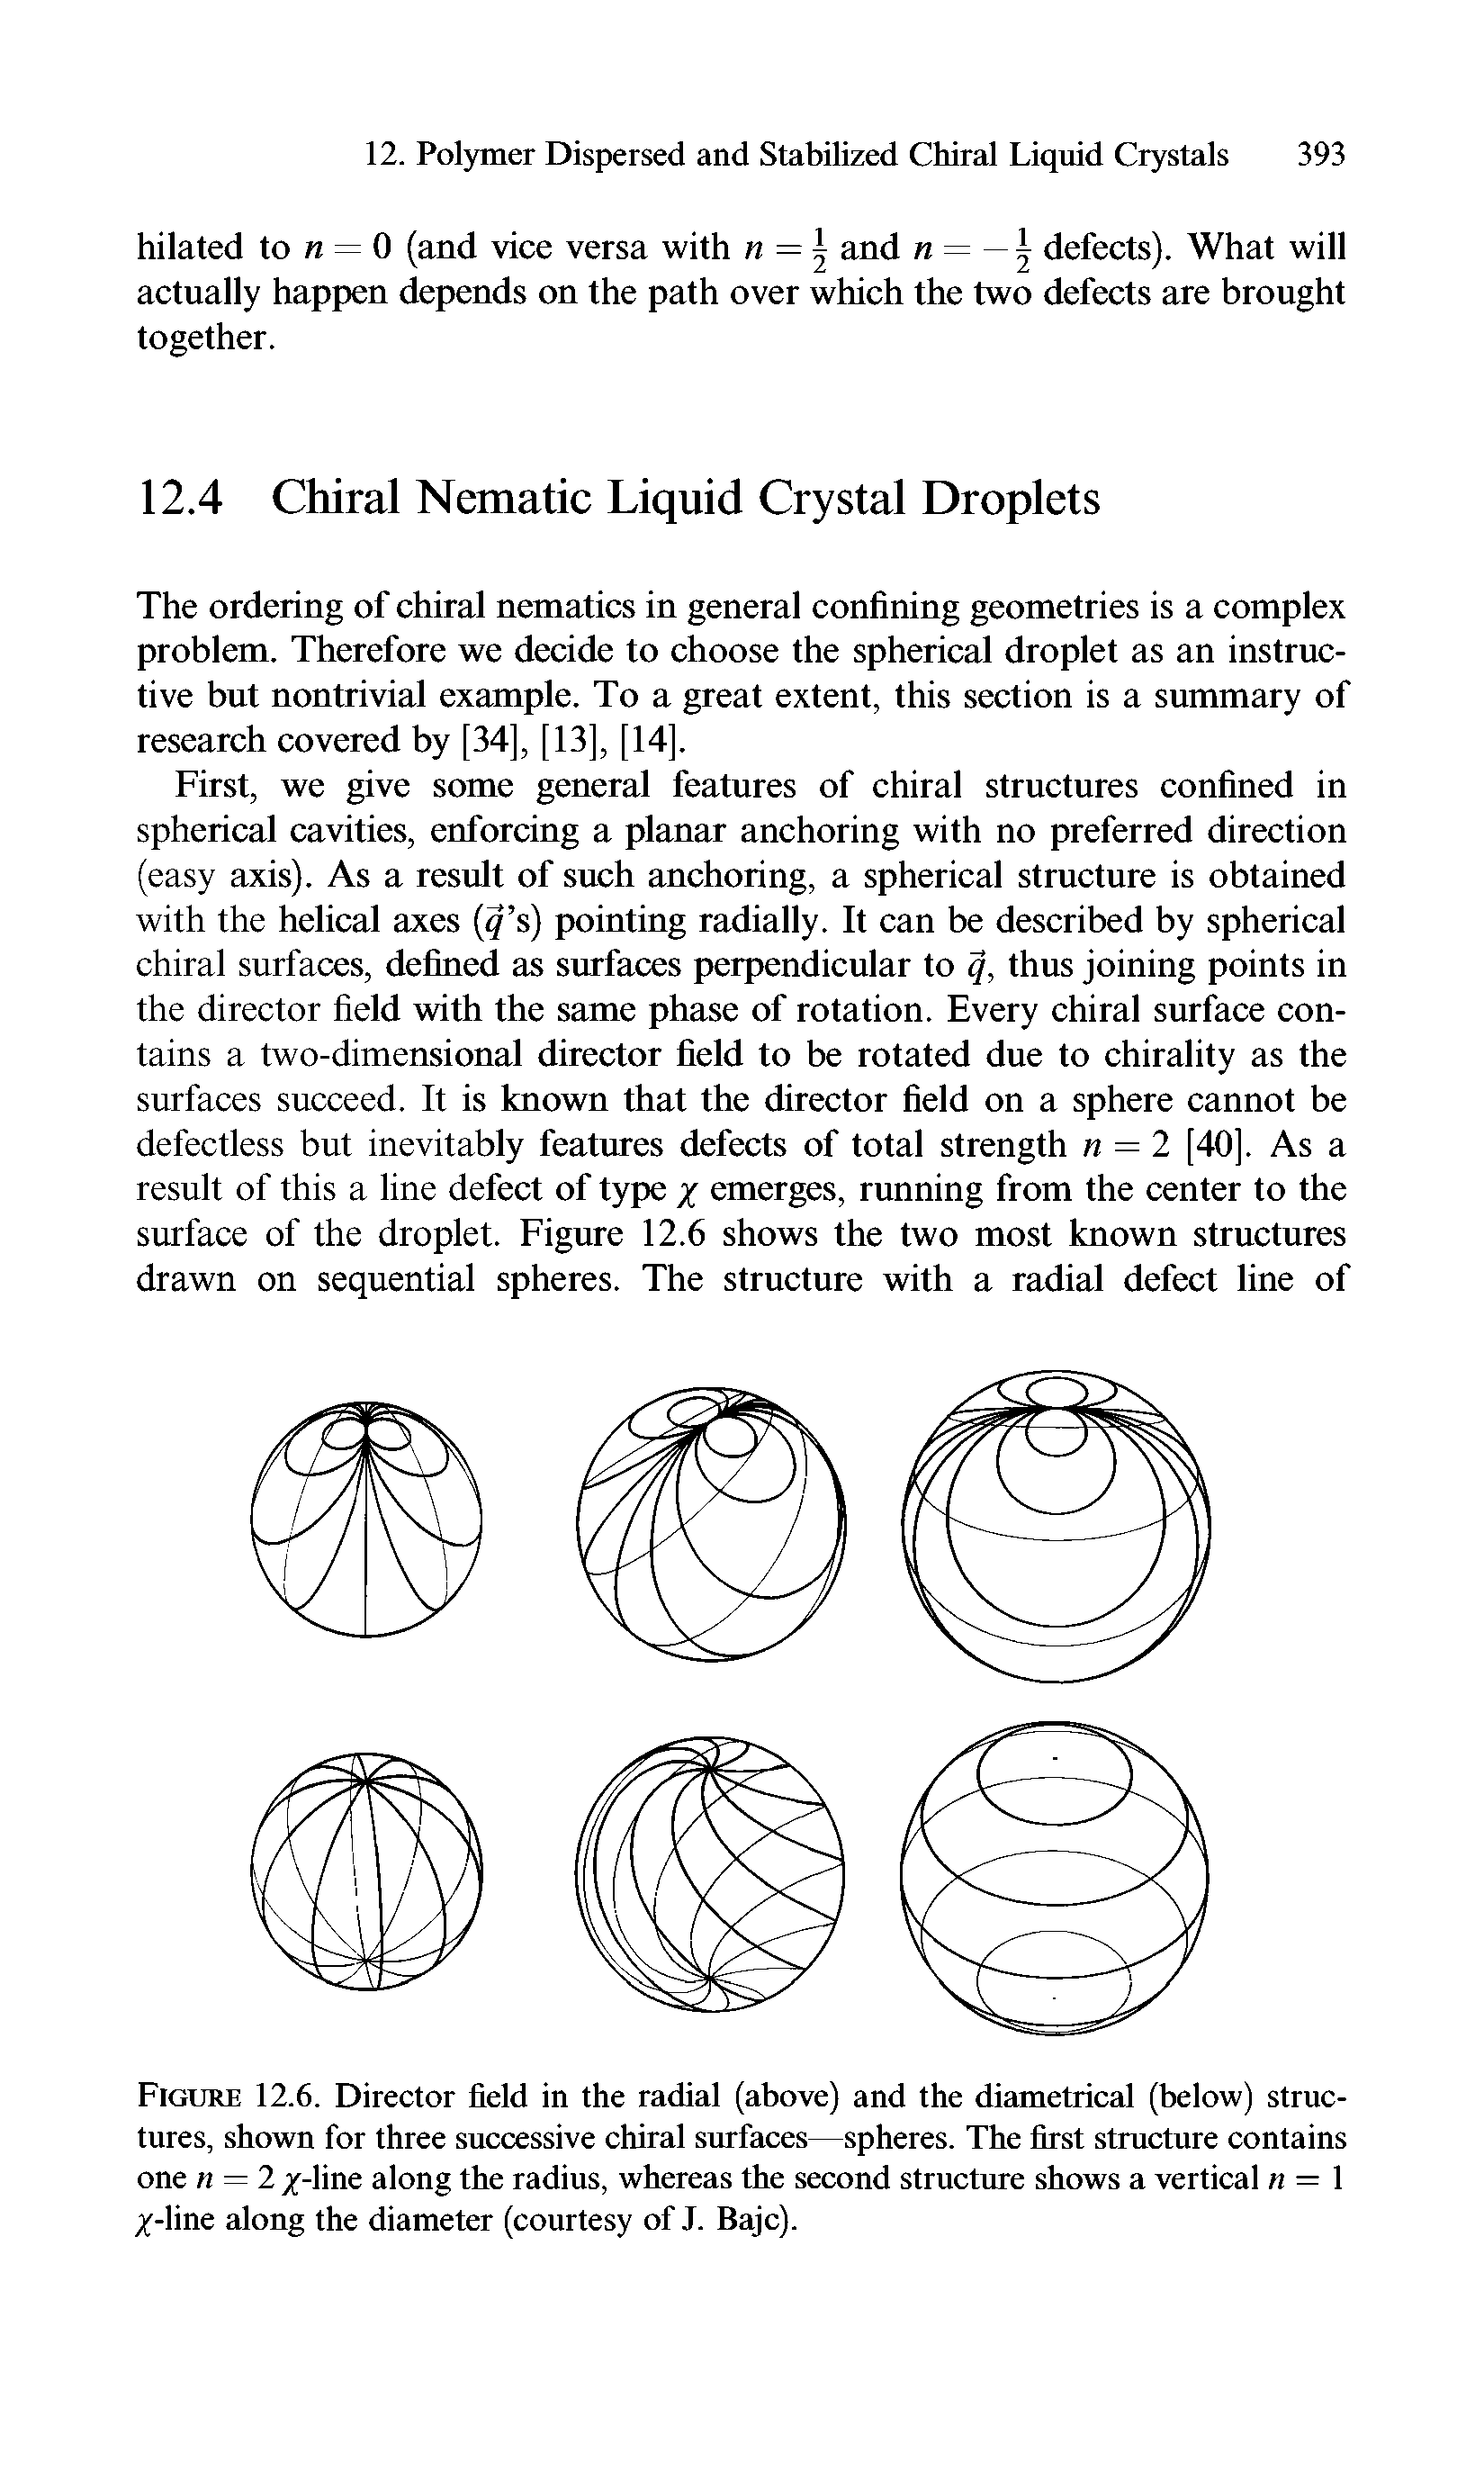 Figure 12.6. Director field in the radial (above) and the diametrical (below) structures, shown for three successive chiral surfaces—spheres. The first structure contains one n = 2 /-line along the radius, whereas the second structure shows a vertical n — 1 /-line along the diameter (courtesy of J. Bajc).